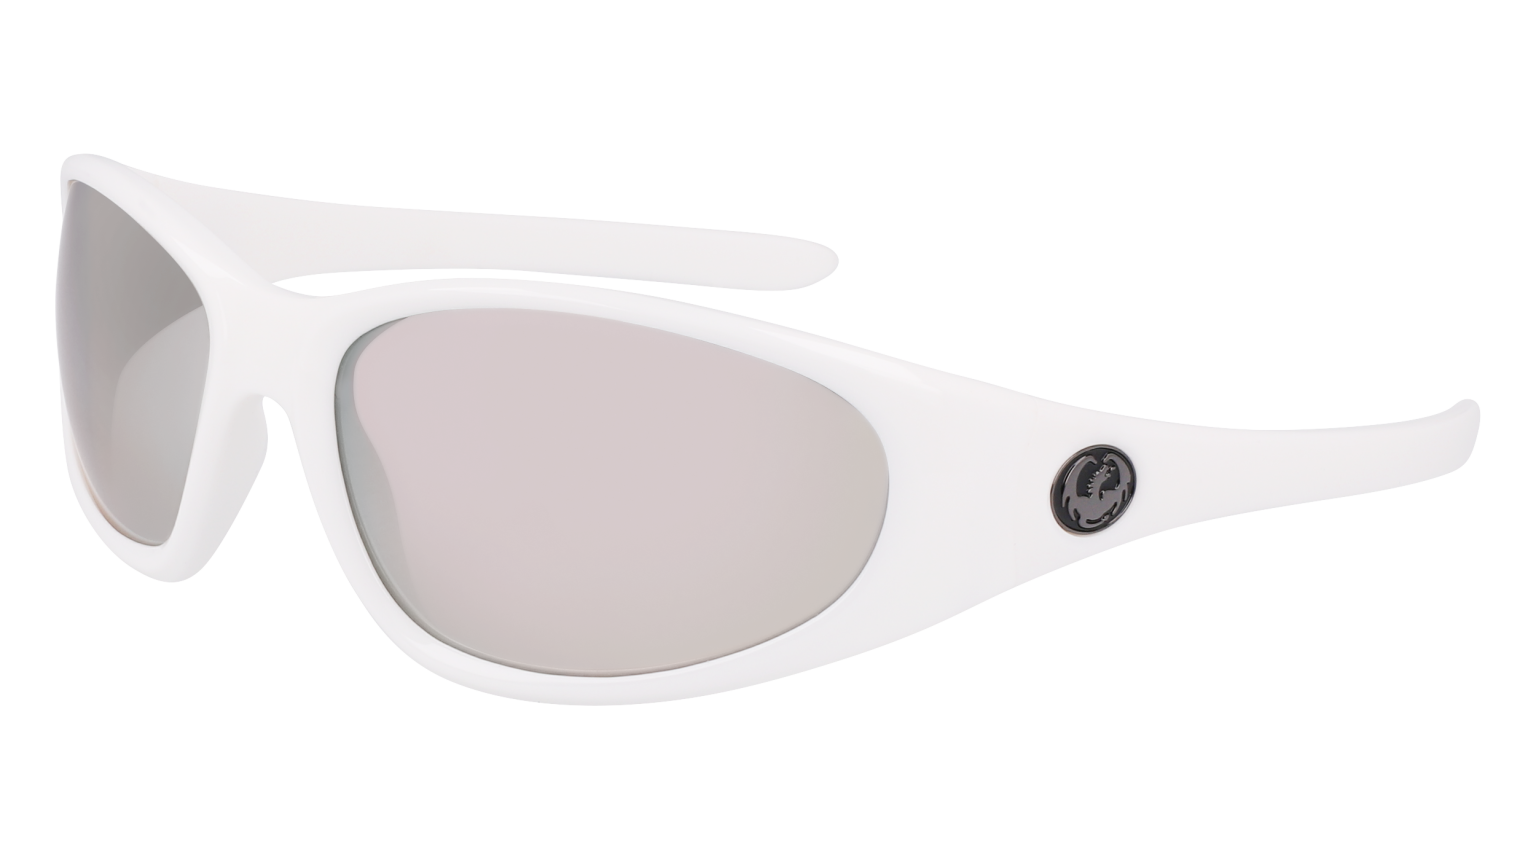 THE BOX 2 - White with Polarized Lumalens Silver Ionized Lens